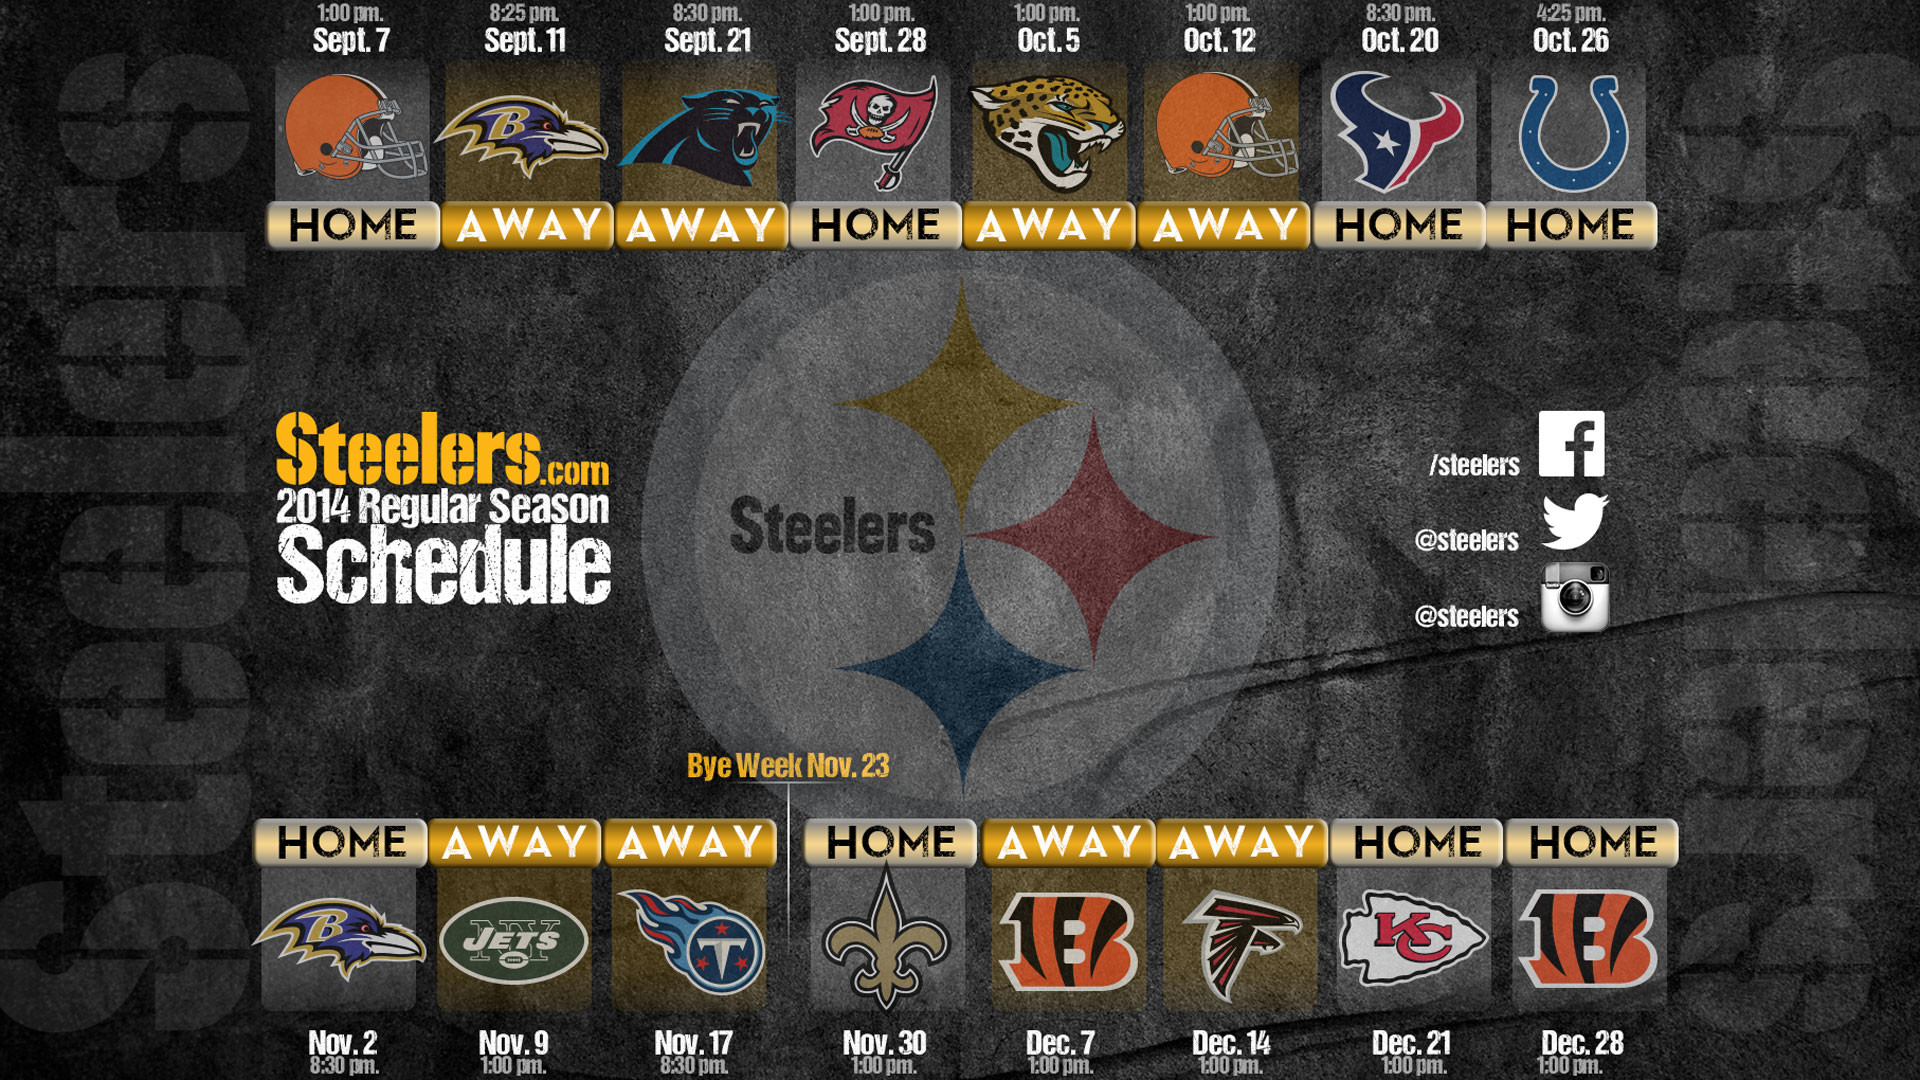 1920x1080 Search Results for “steelers schedule 2015 wallpaper” – Adorable Wallpapers